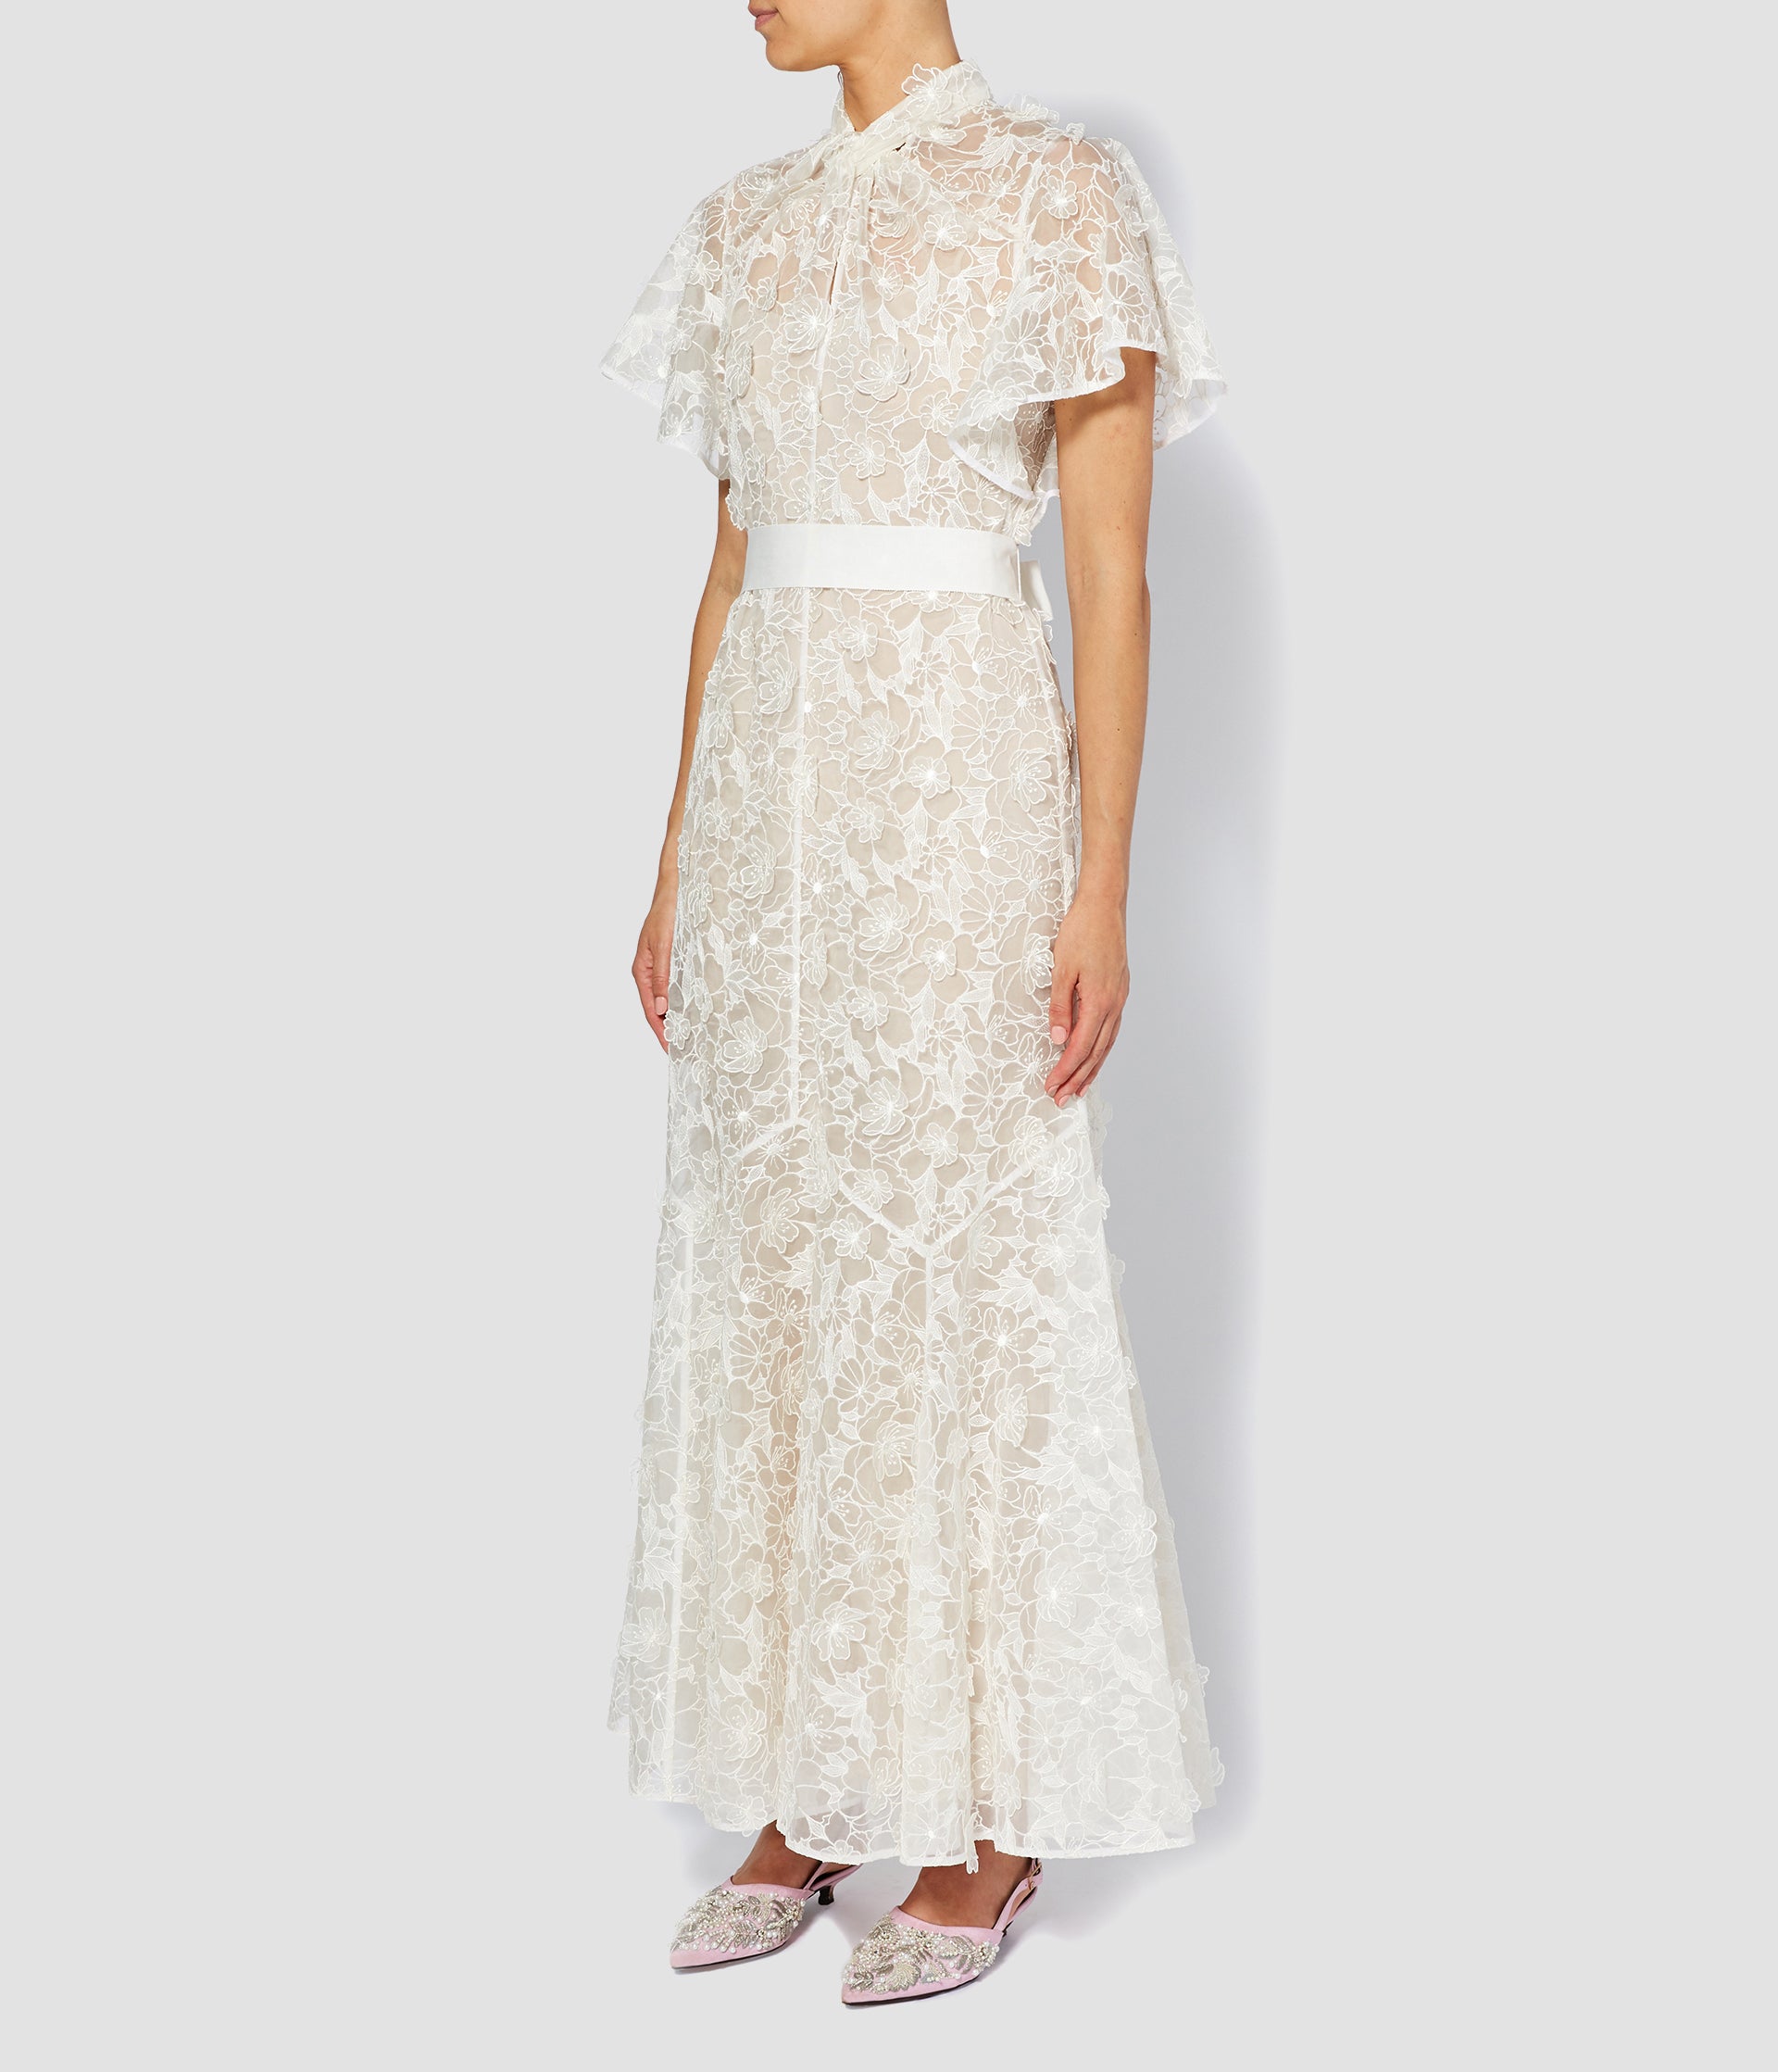 The Celestina wedding dress by designer ERDEM. Made from 3D organza with a floral pattern, this modern wedding dress has a panelled skirt, cape-style sleeves and a waist belt. 